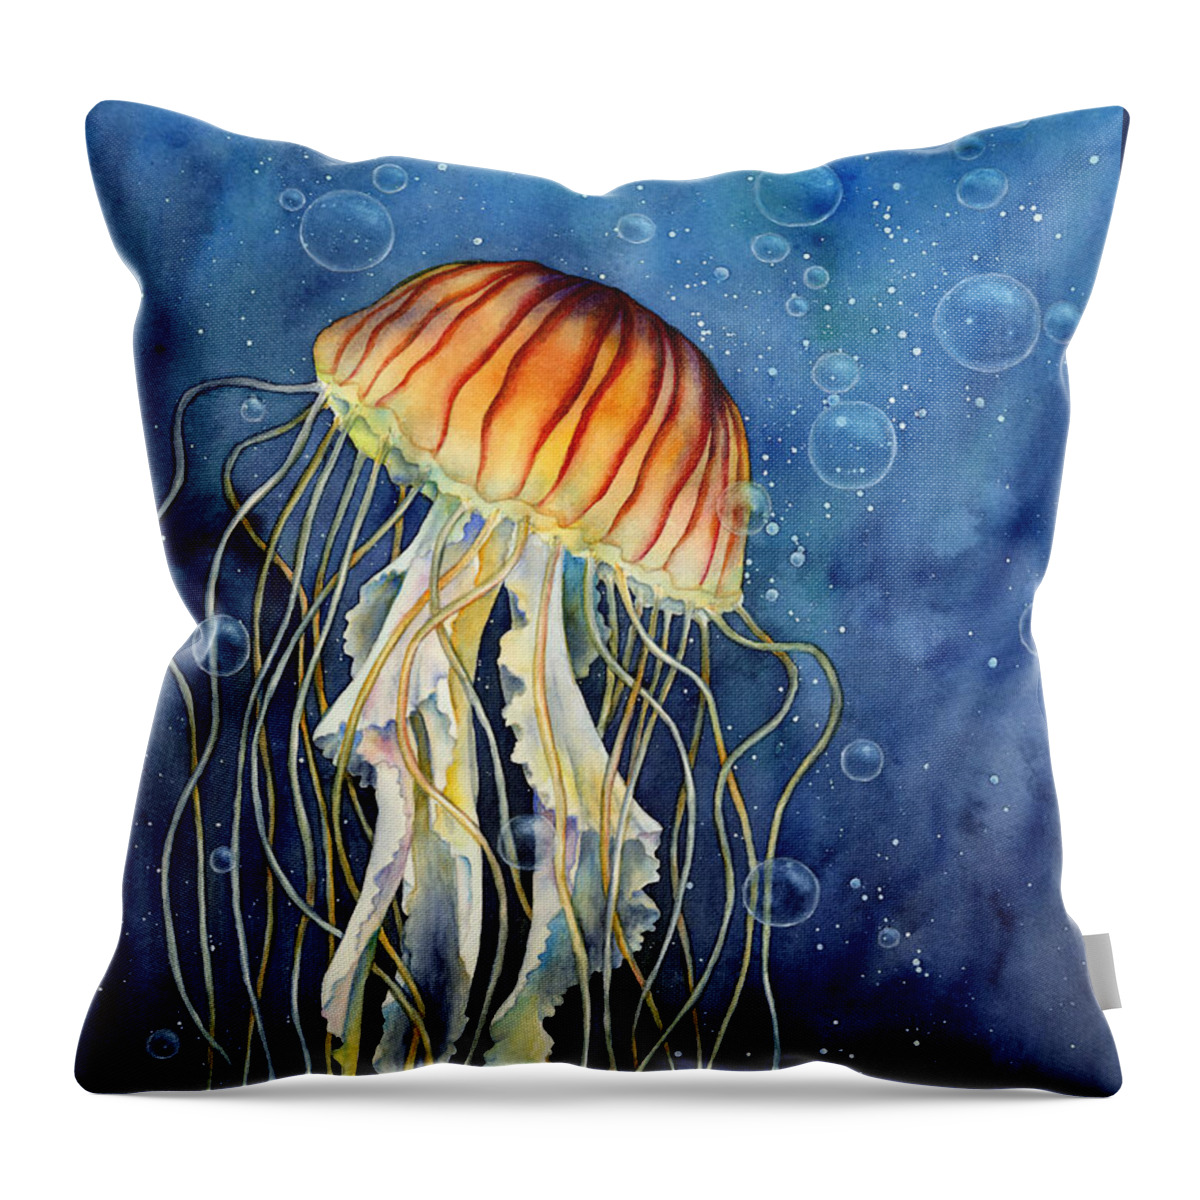 Jellyfish Throw Pillow featuring the painting Jellyfish by Hailey E Herrera